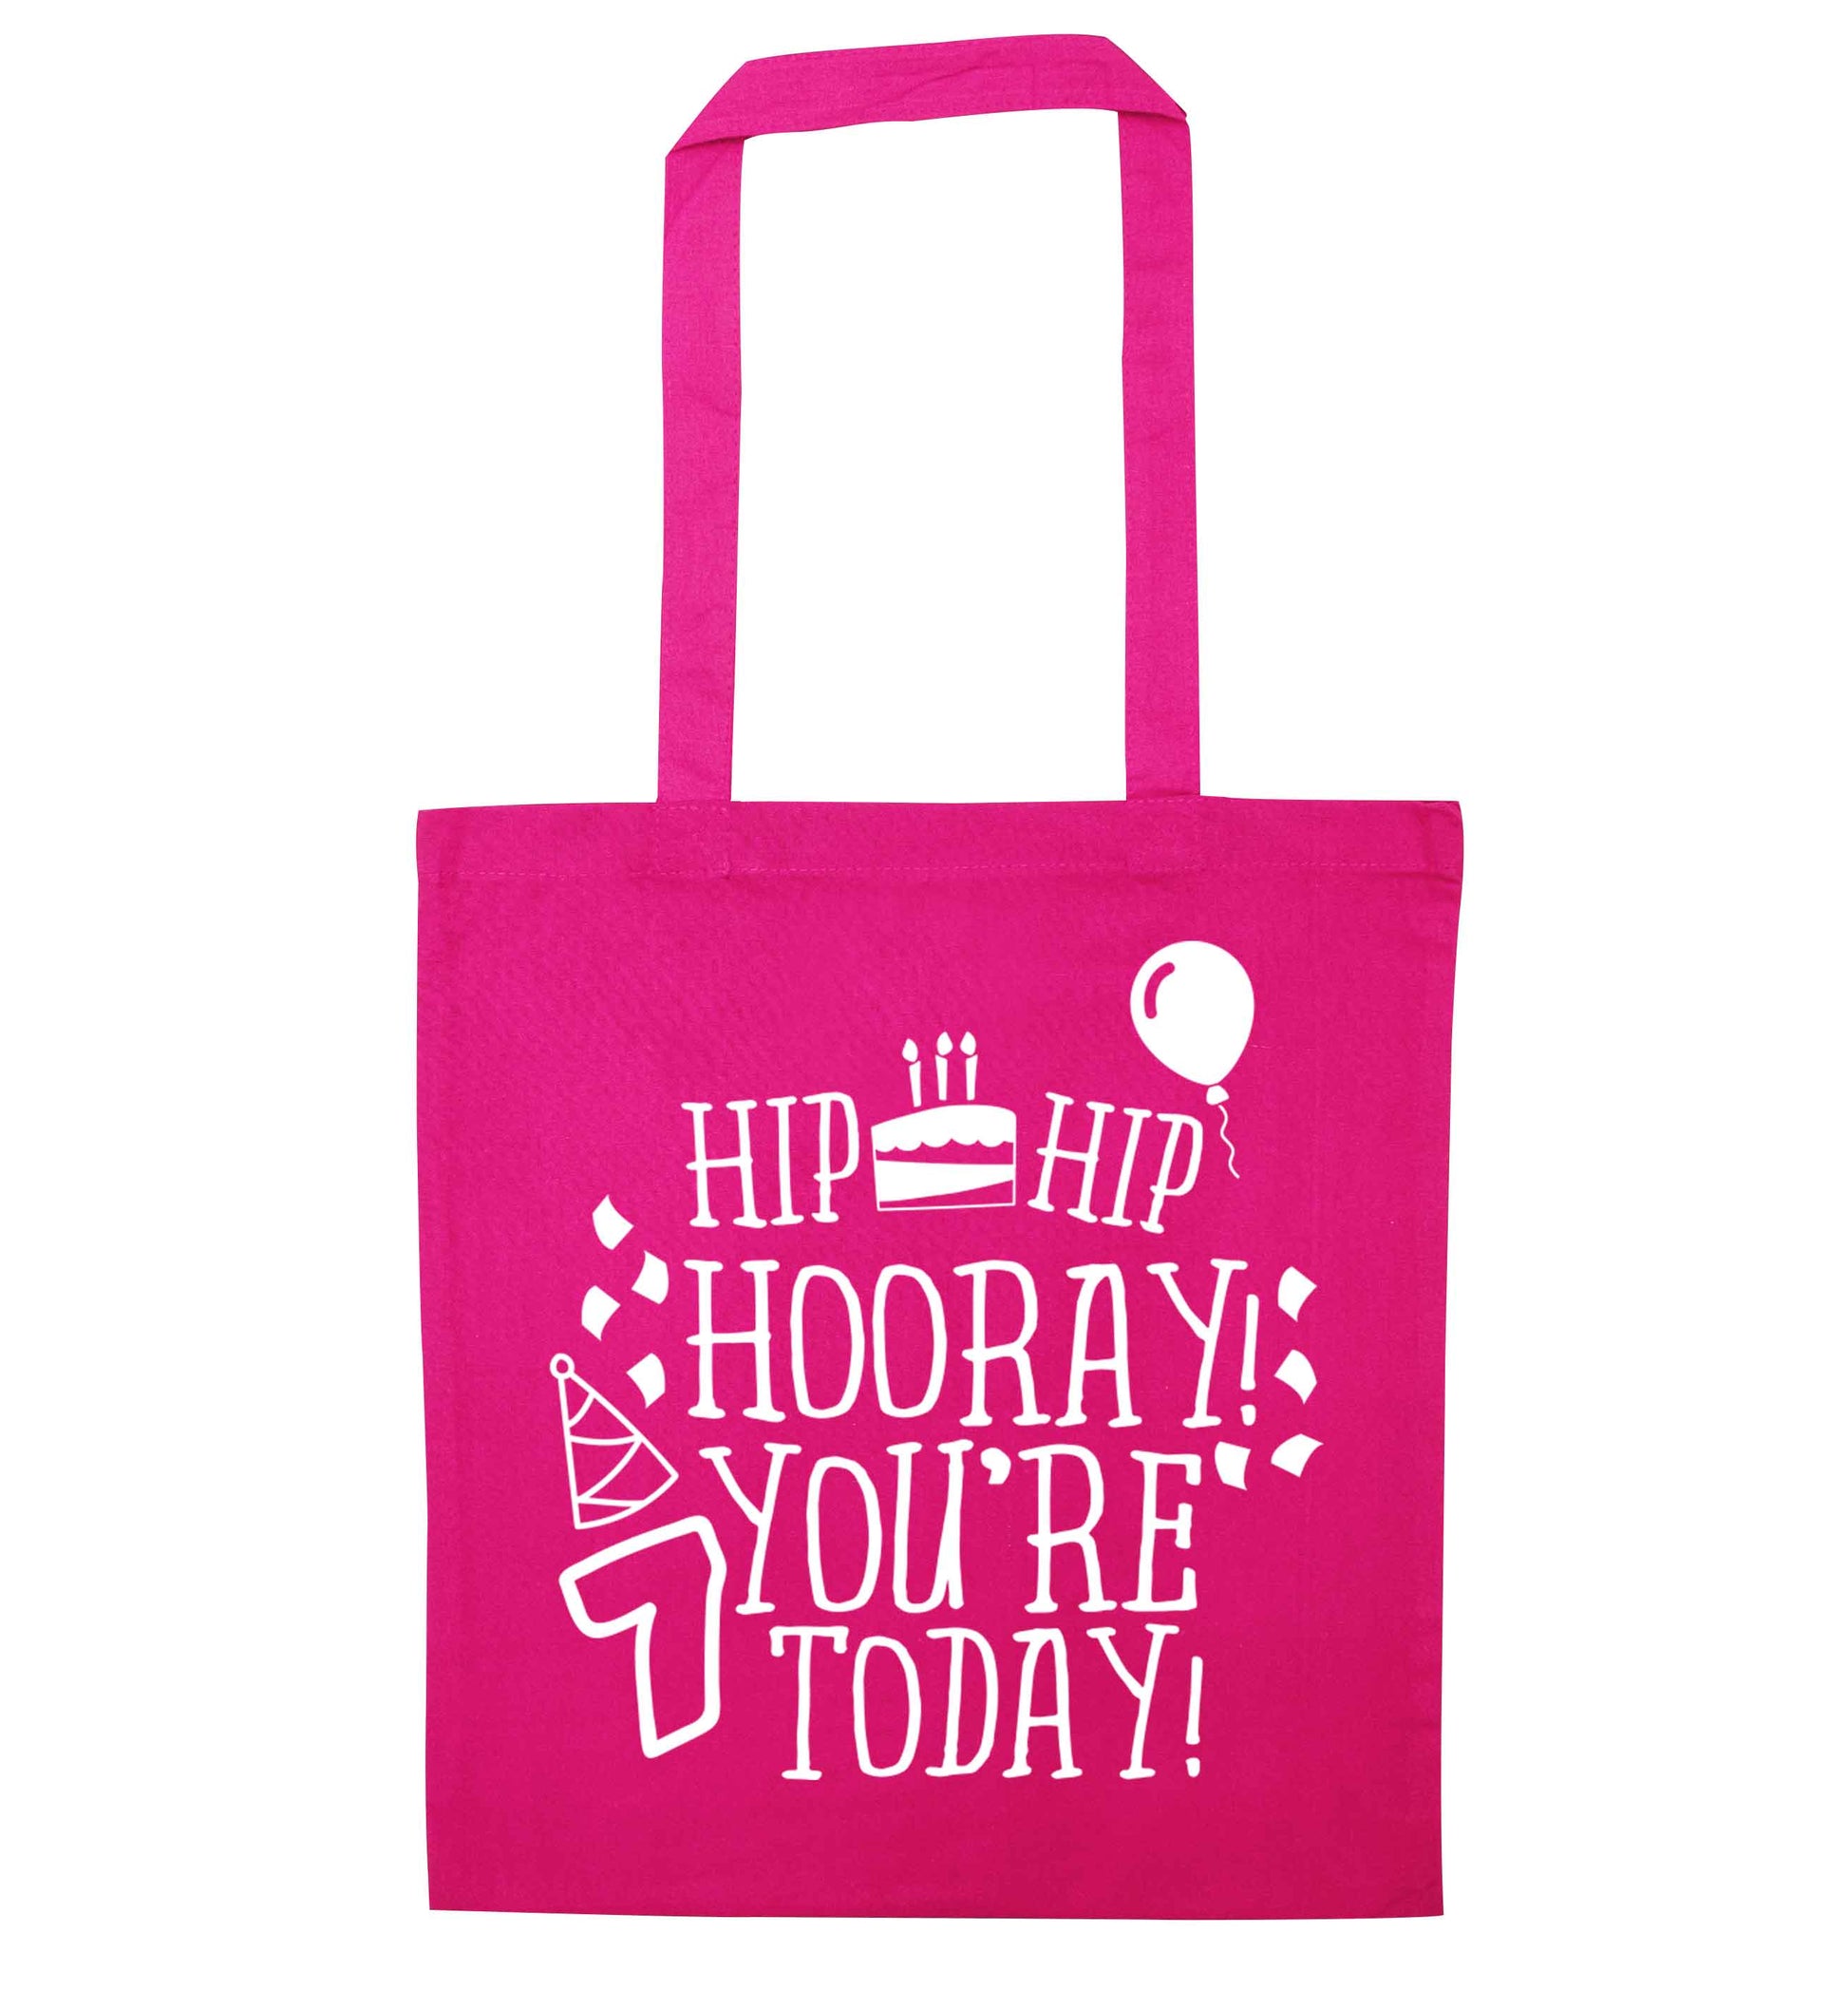 Hip hip hooray you're seven today! pink tote bag